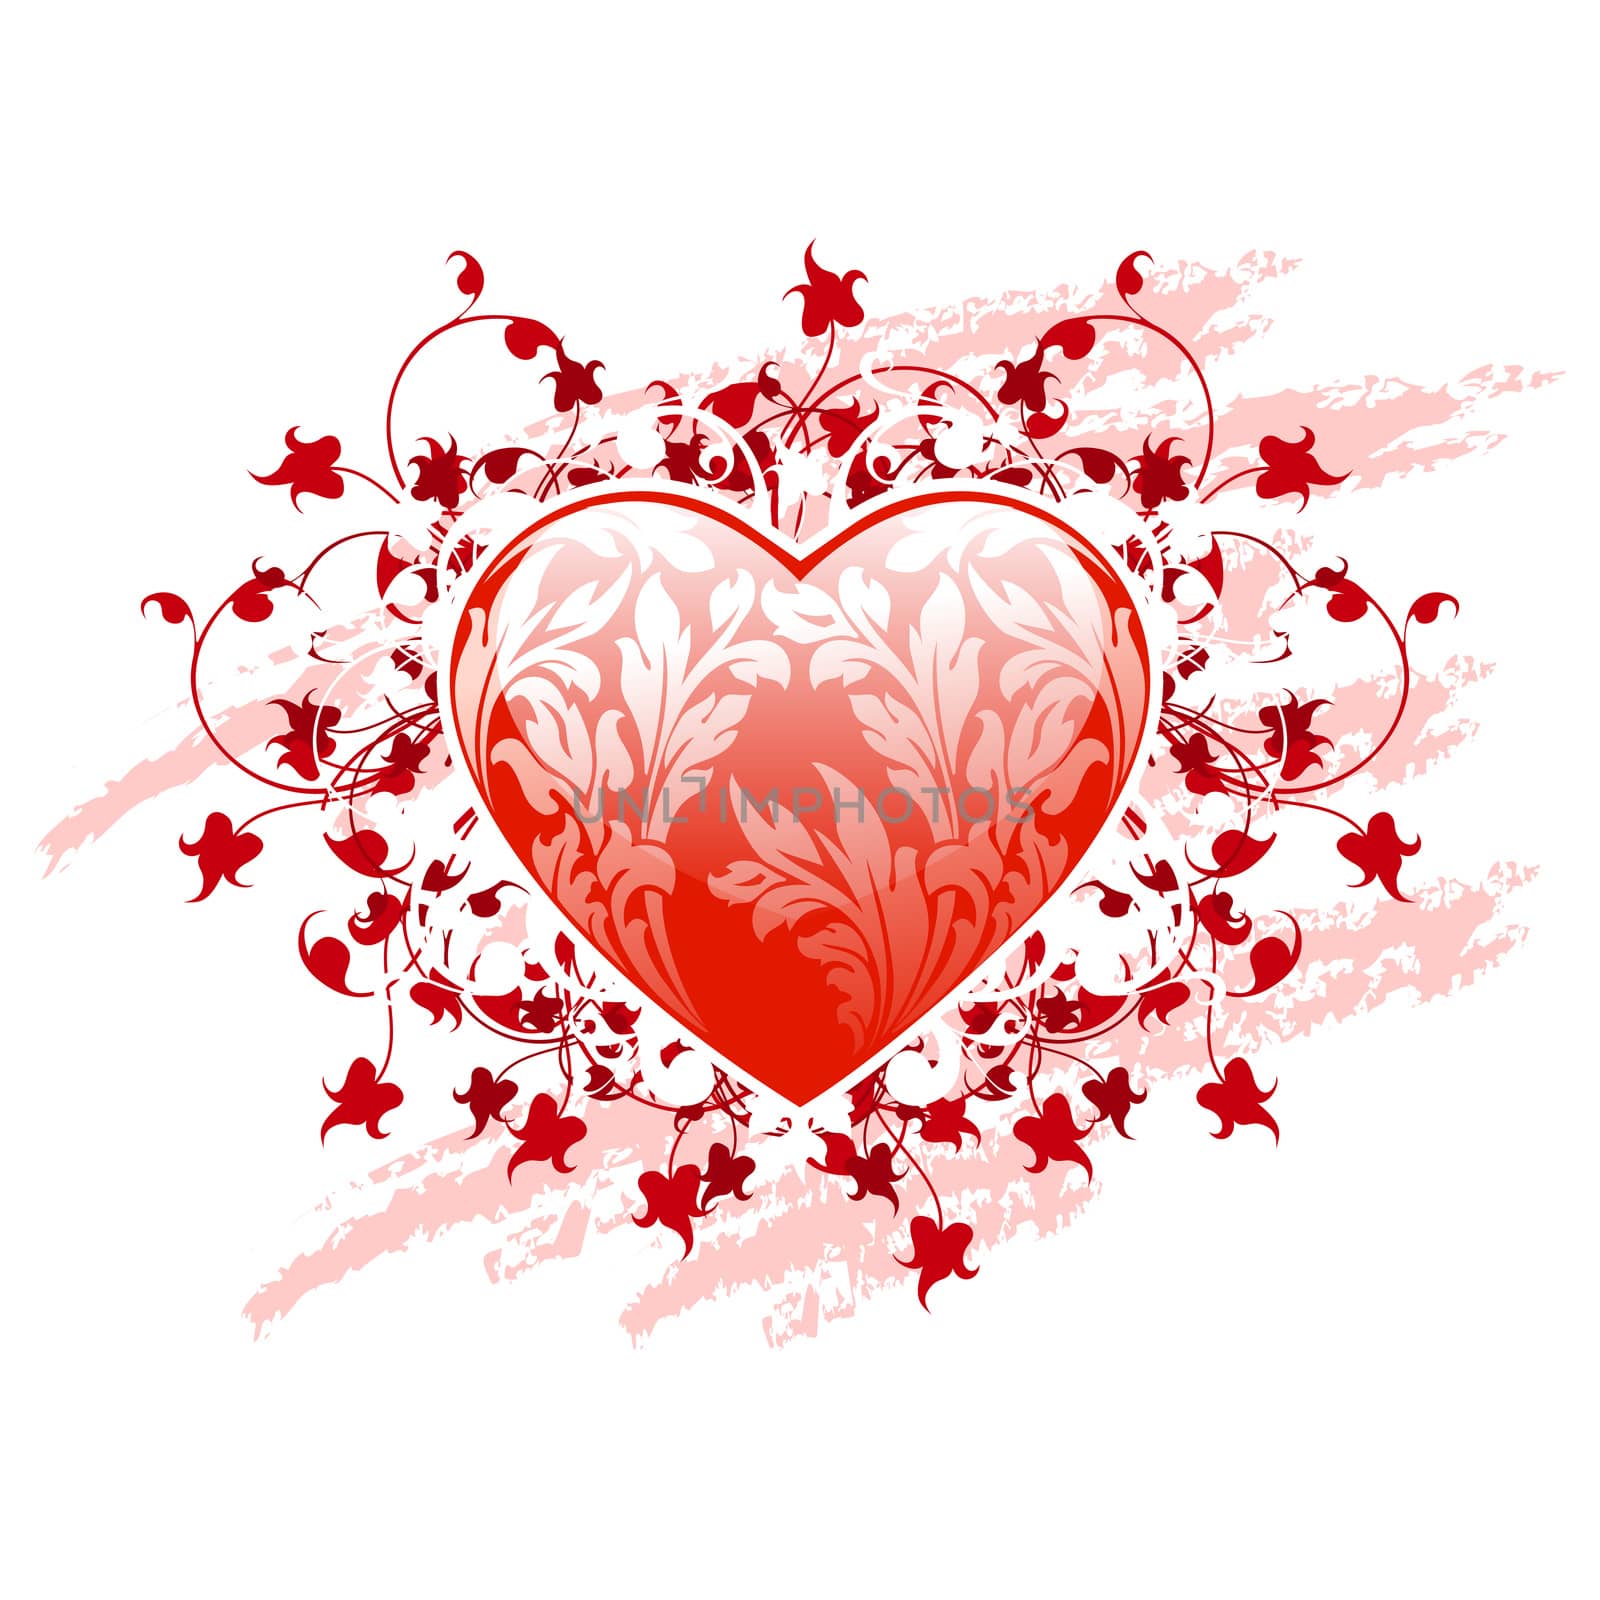 Red valentines heart with floral pattern by WaD